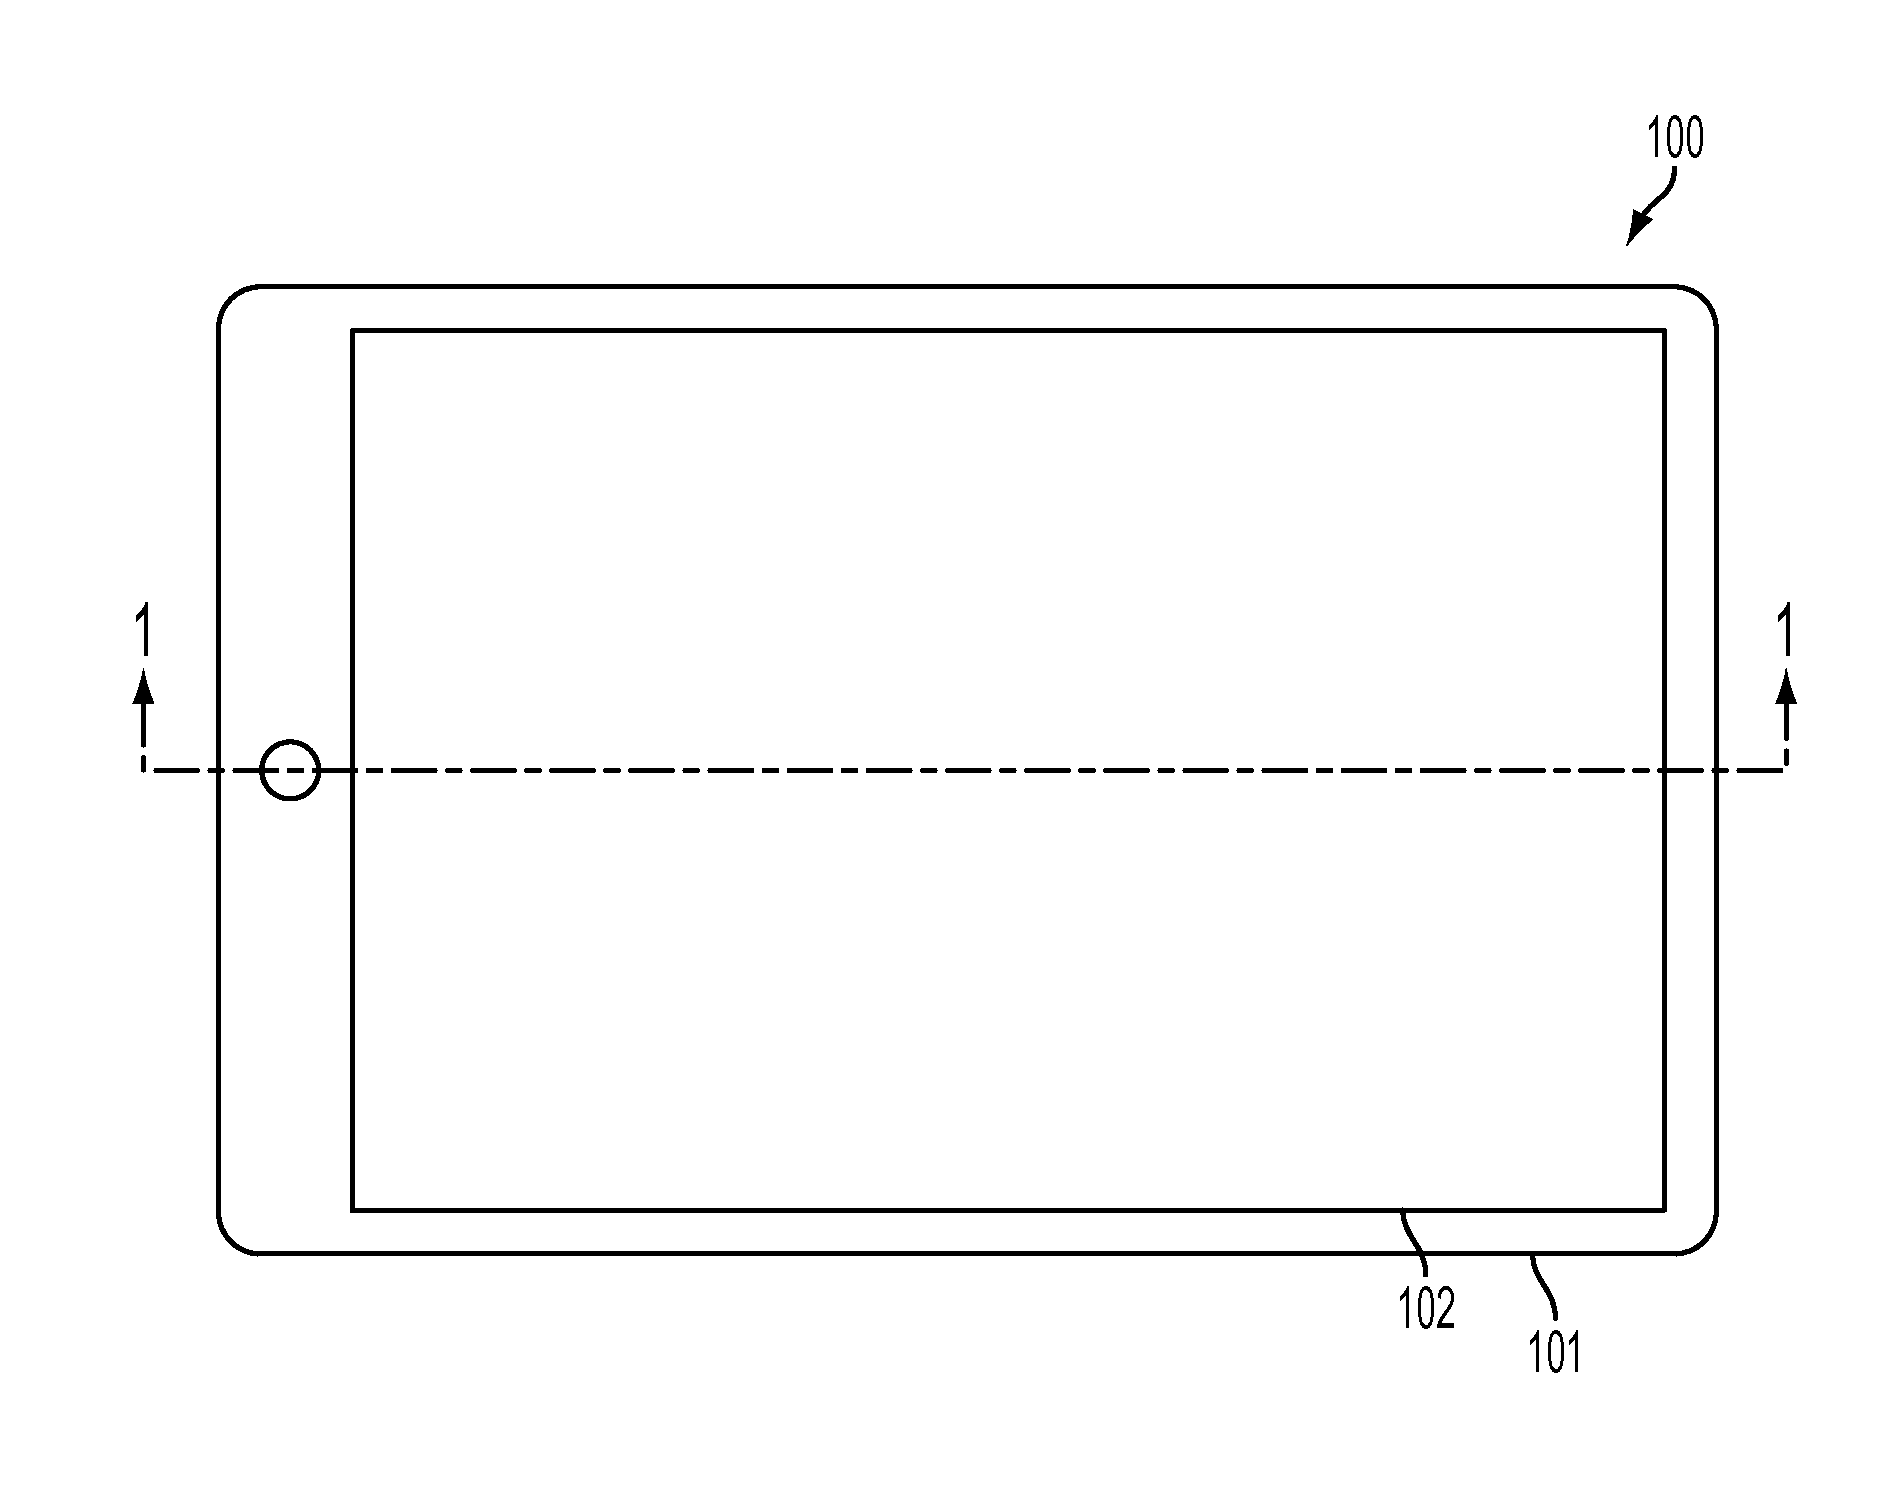 Spatially interactive computing device